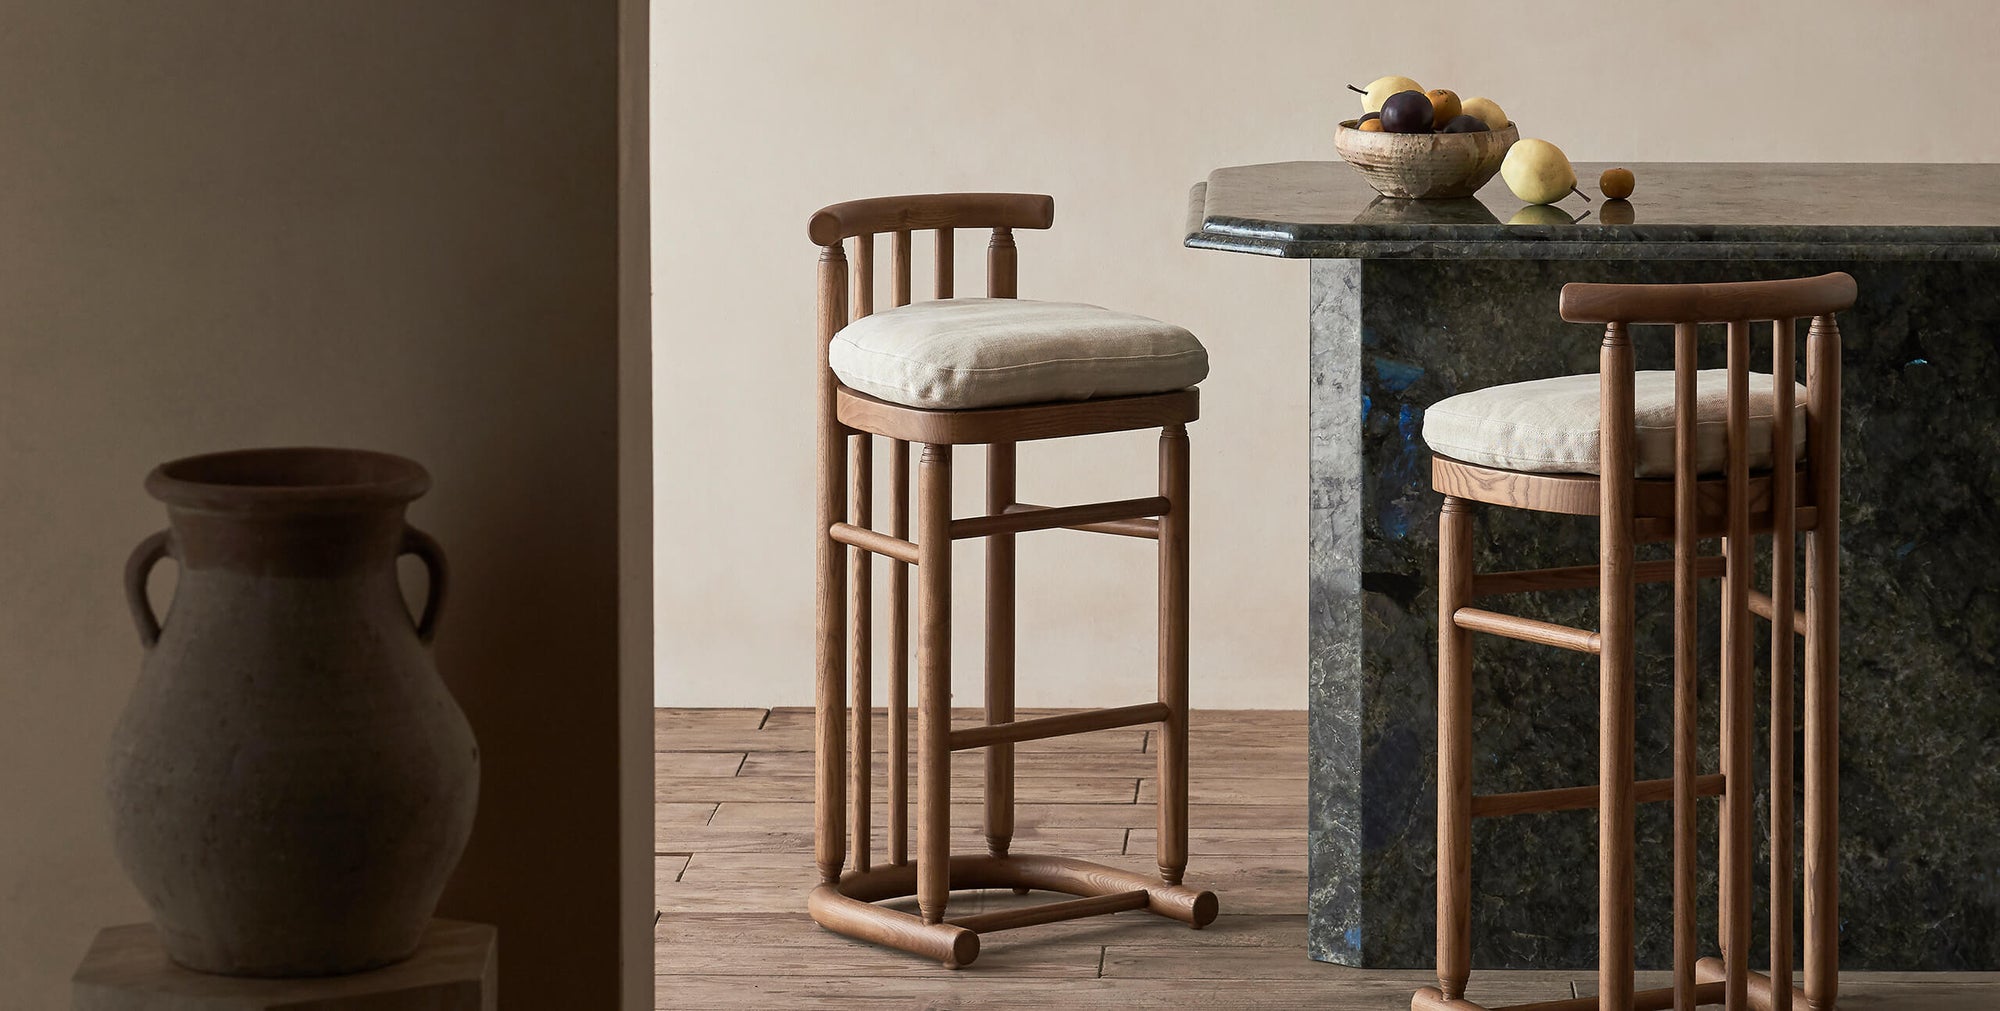 Two Bene Counter Stools in Heritage Ash wood and cushions in Warm Oatmeal, a light warm beige Medium Weight Linen, sitting at a dark stone counter holding a bowl of fruit